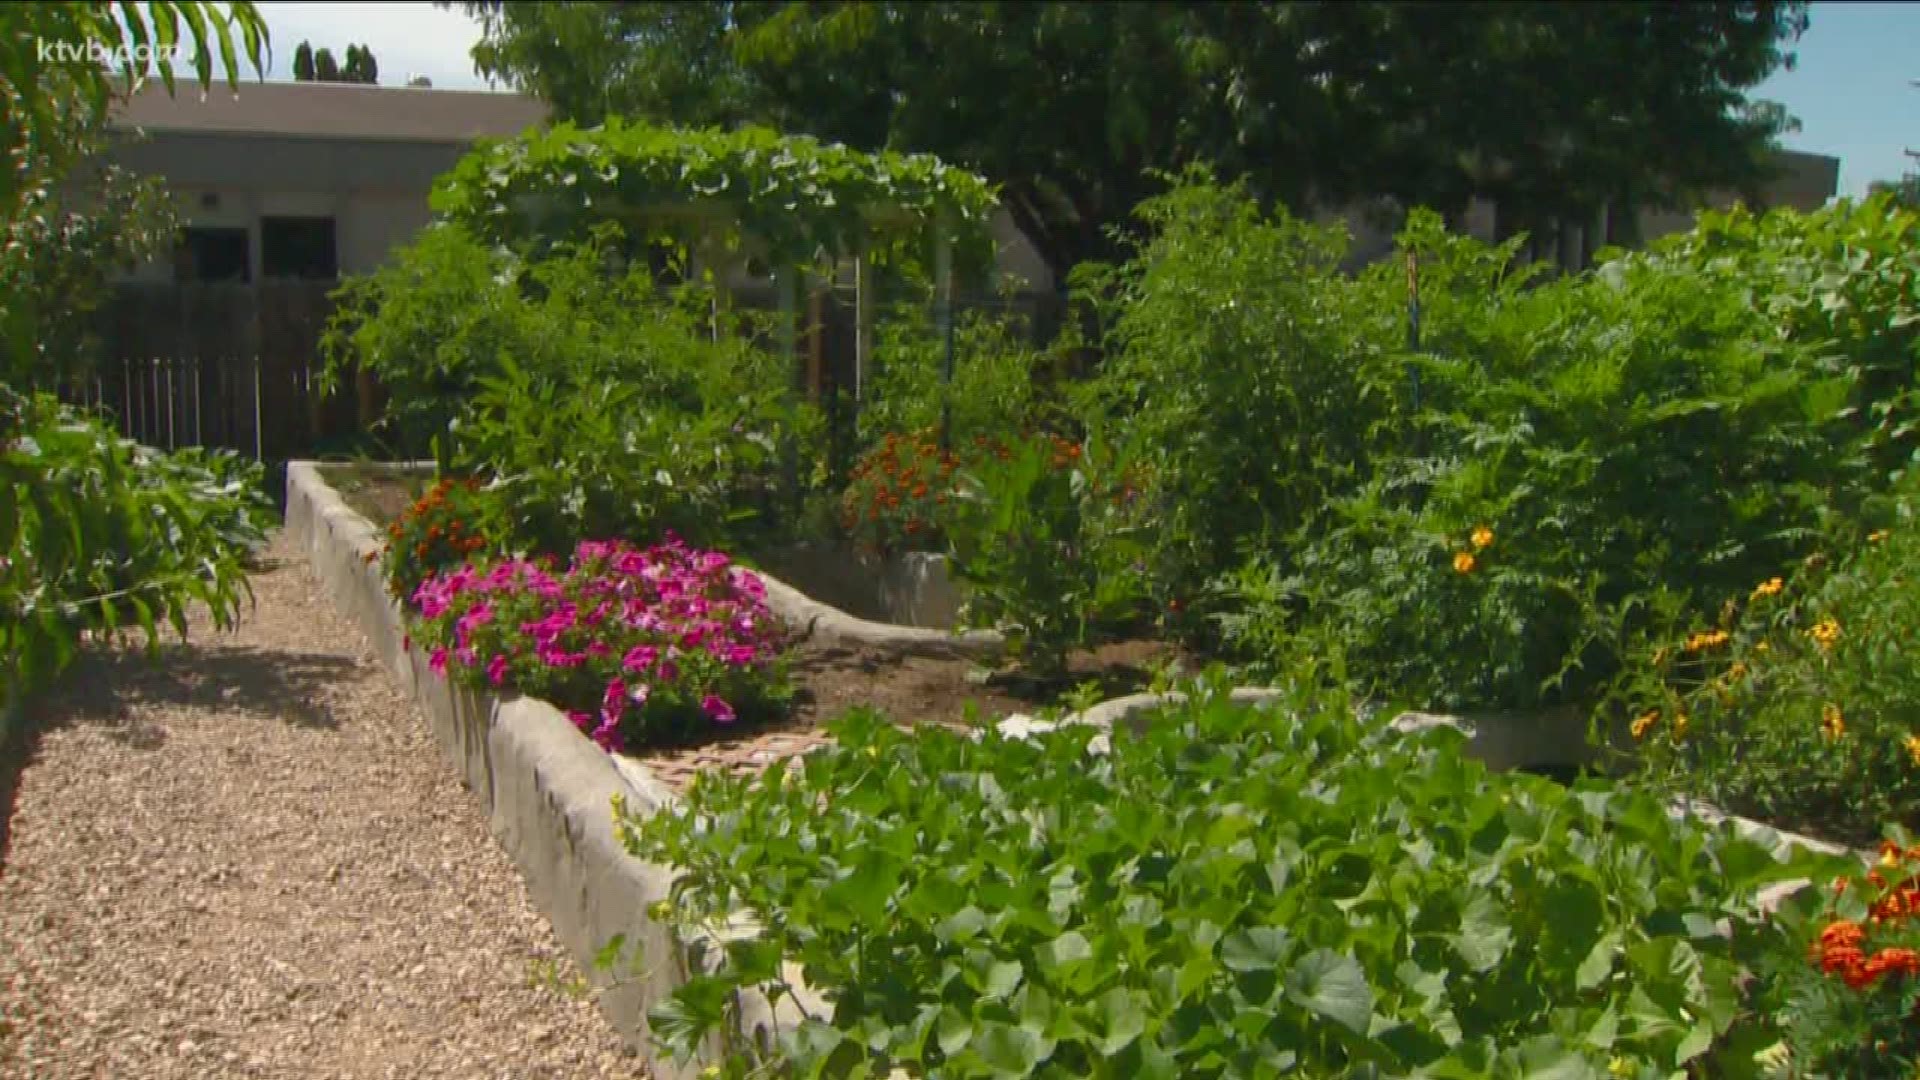 Jim Duthie introduces us to a man whose family grows everything in their backyard garden.